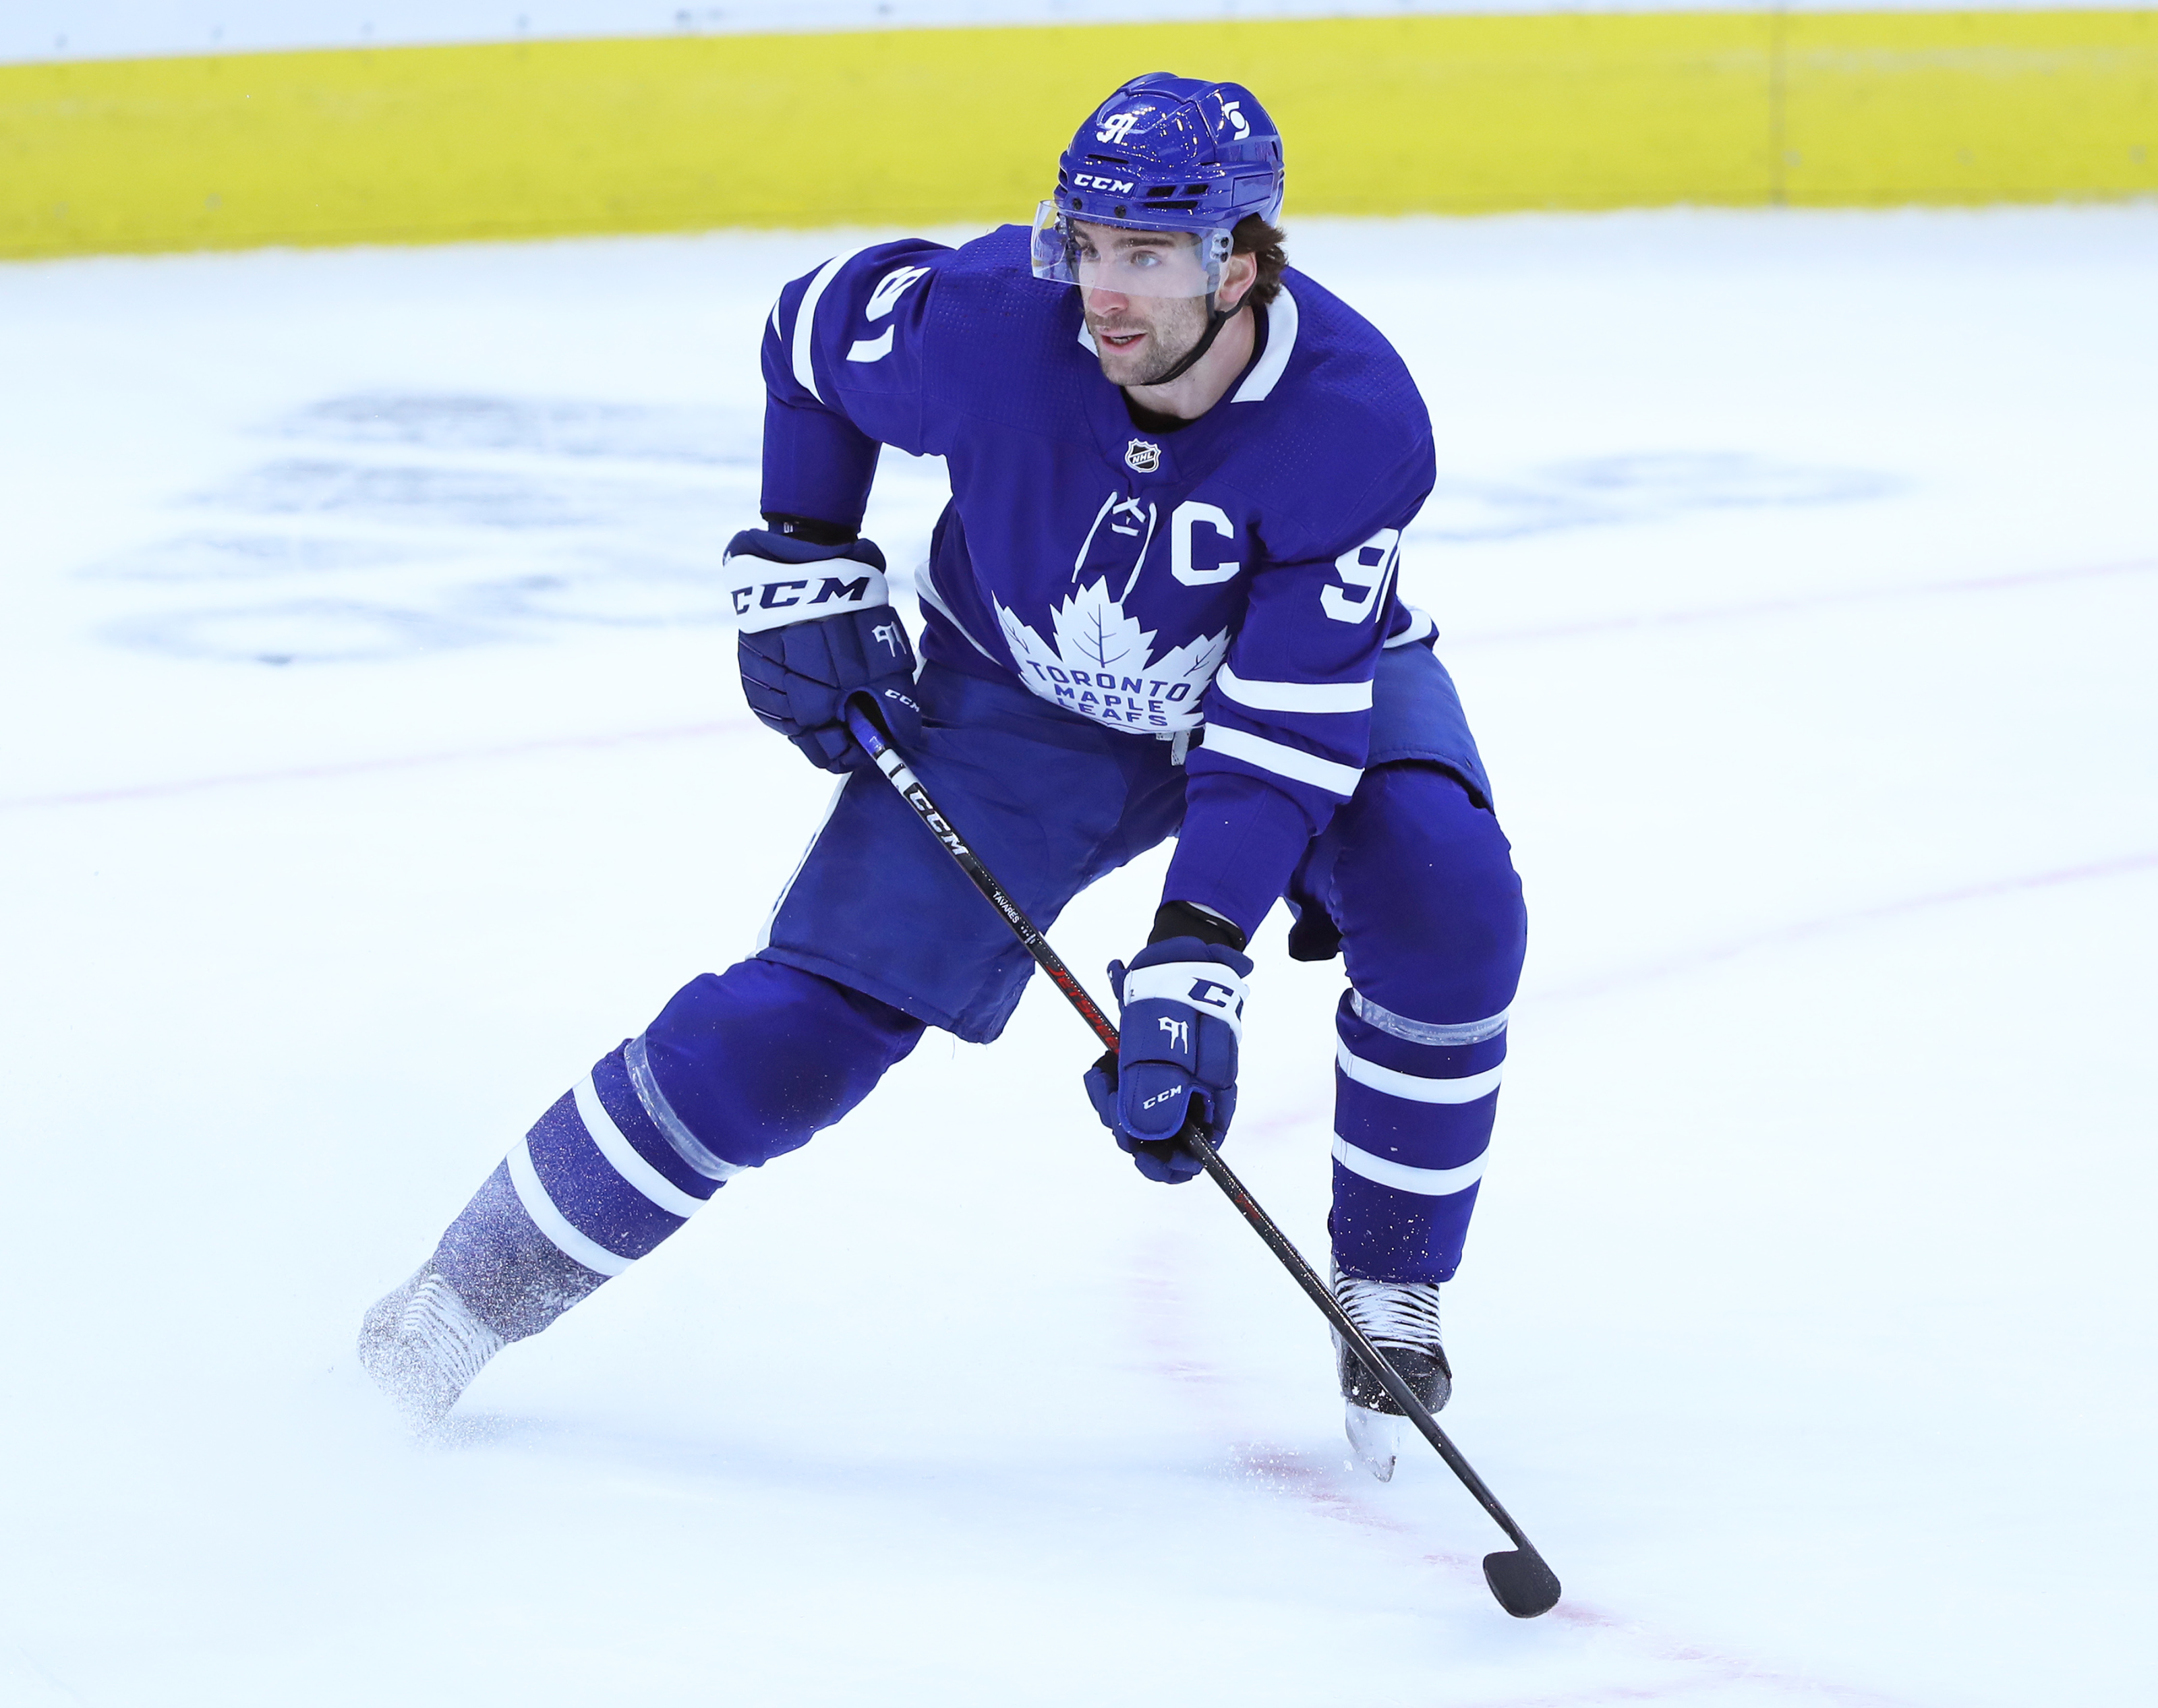 John Tavares of the Toronto Maple Leafs makes his way to the ice